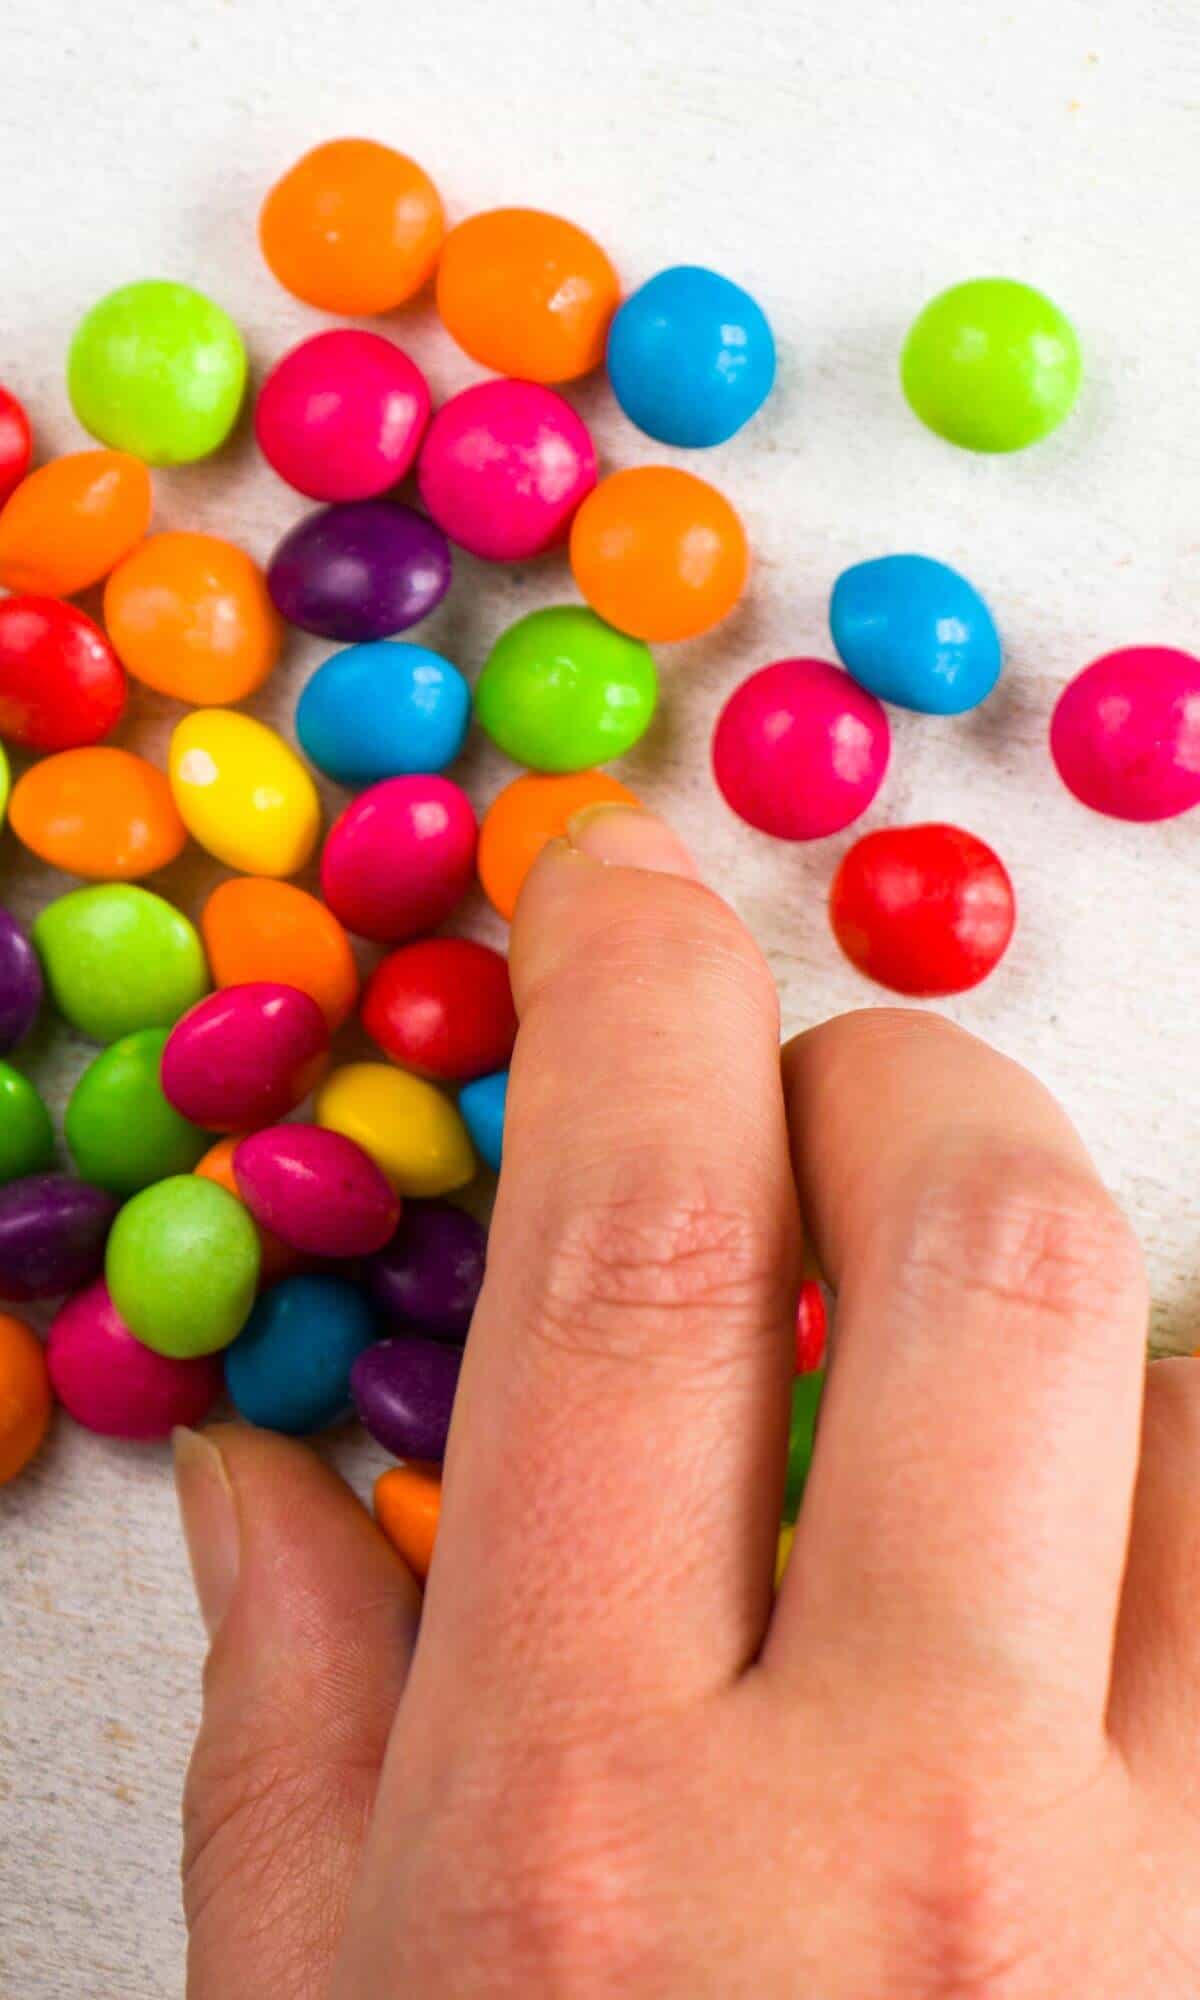 Hand touching a pile of Skittles candies for the article titled: Are Skittles Gluten Free?